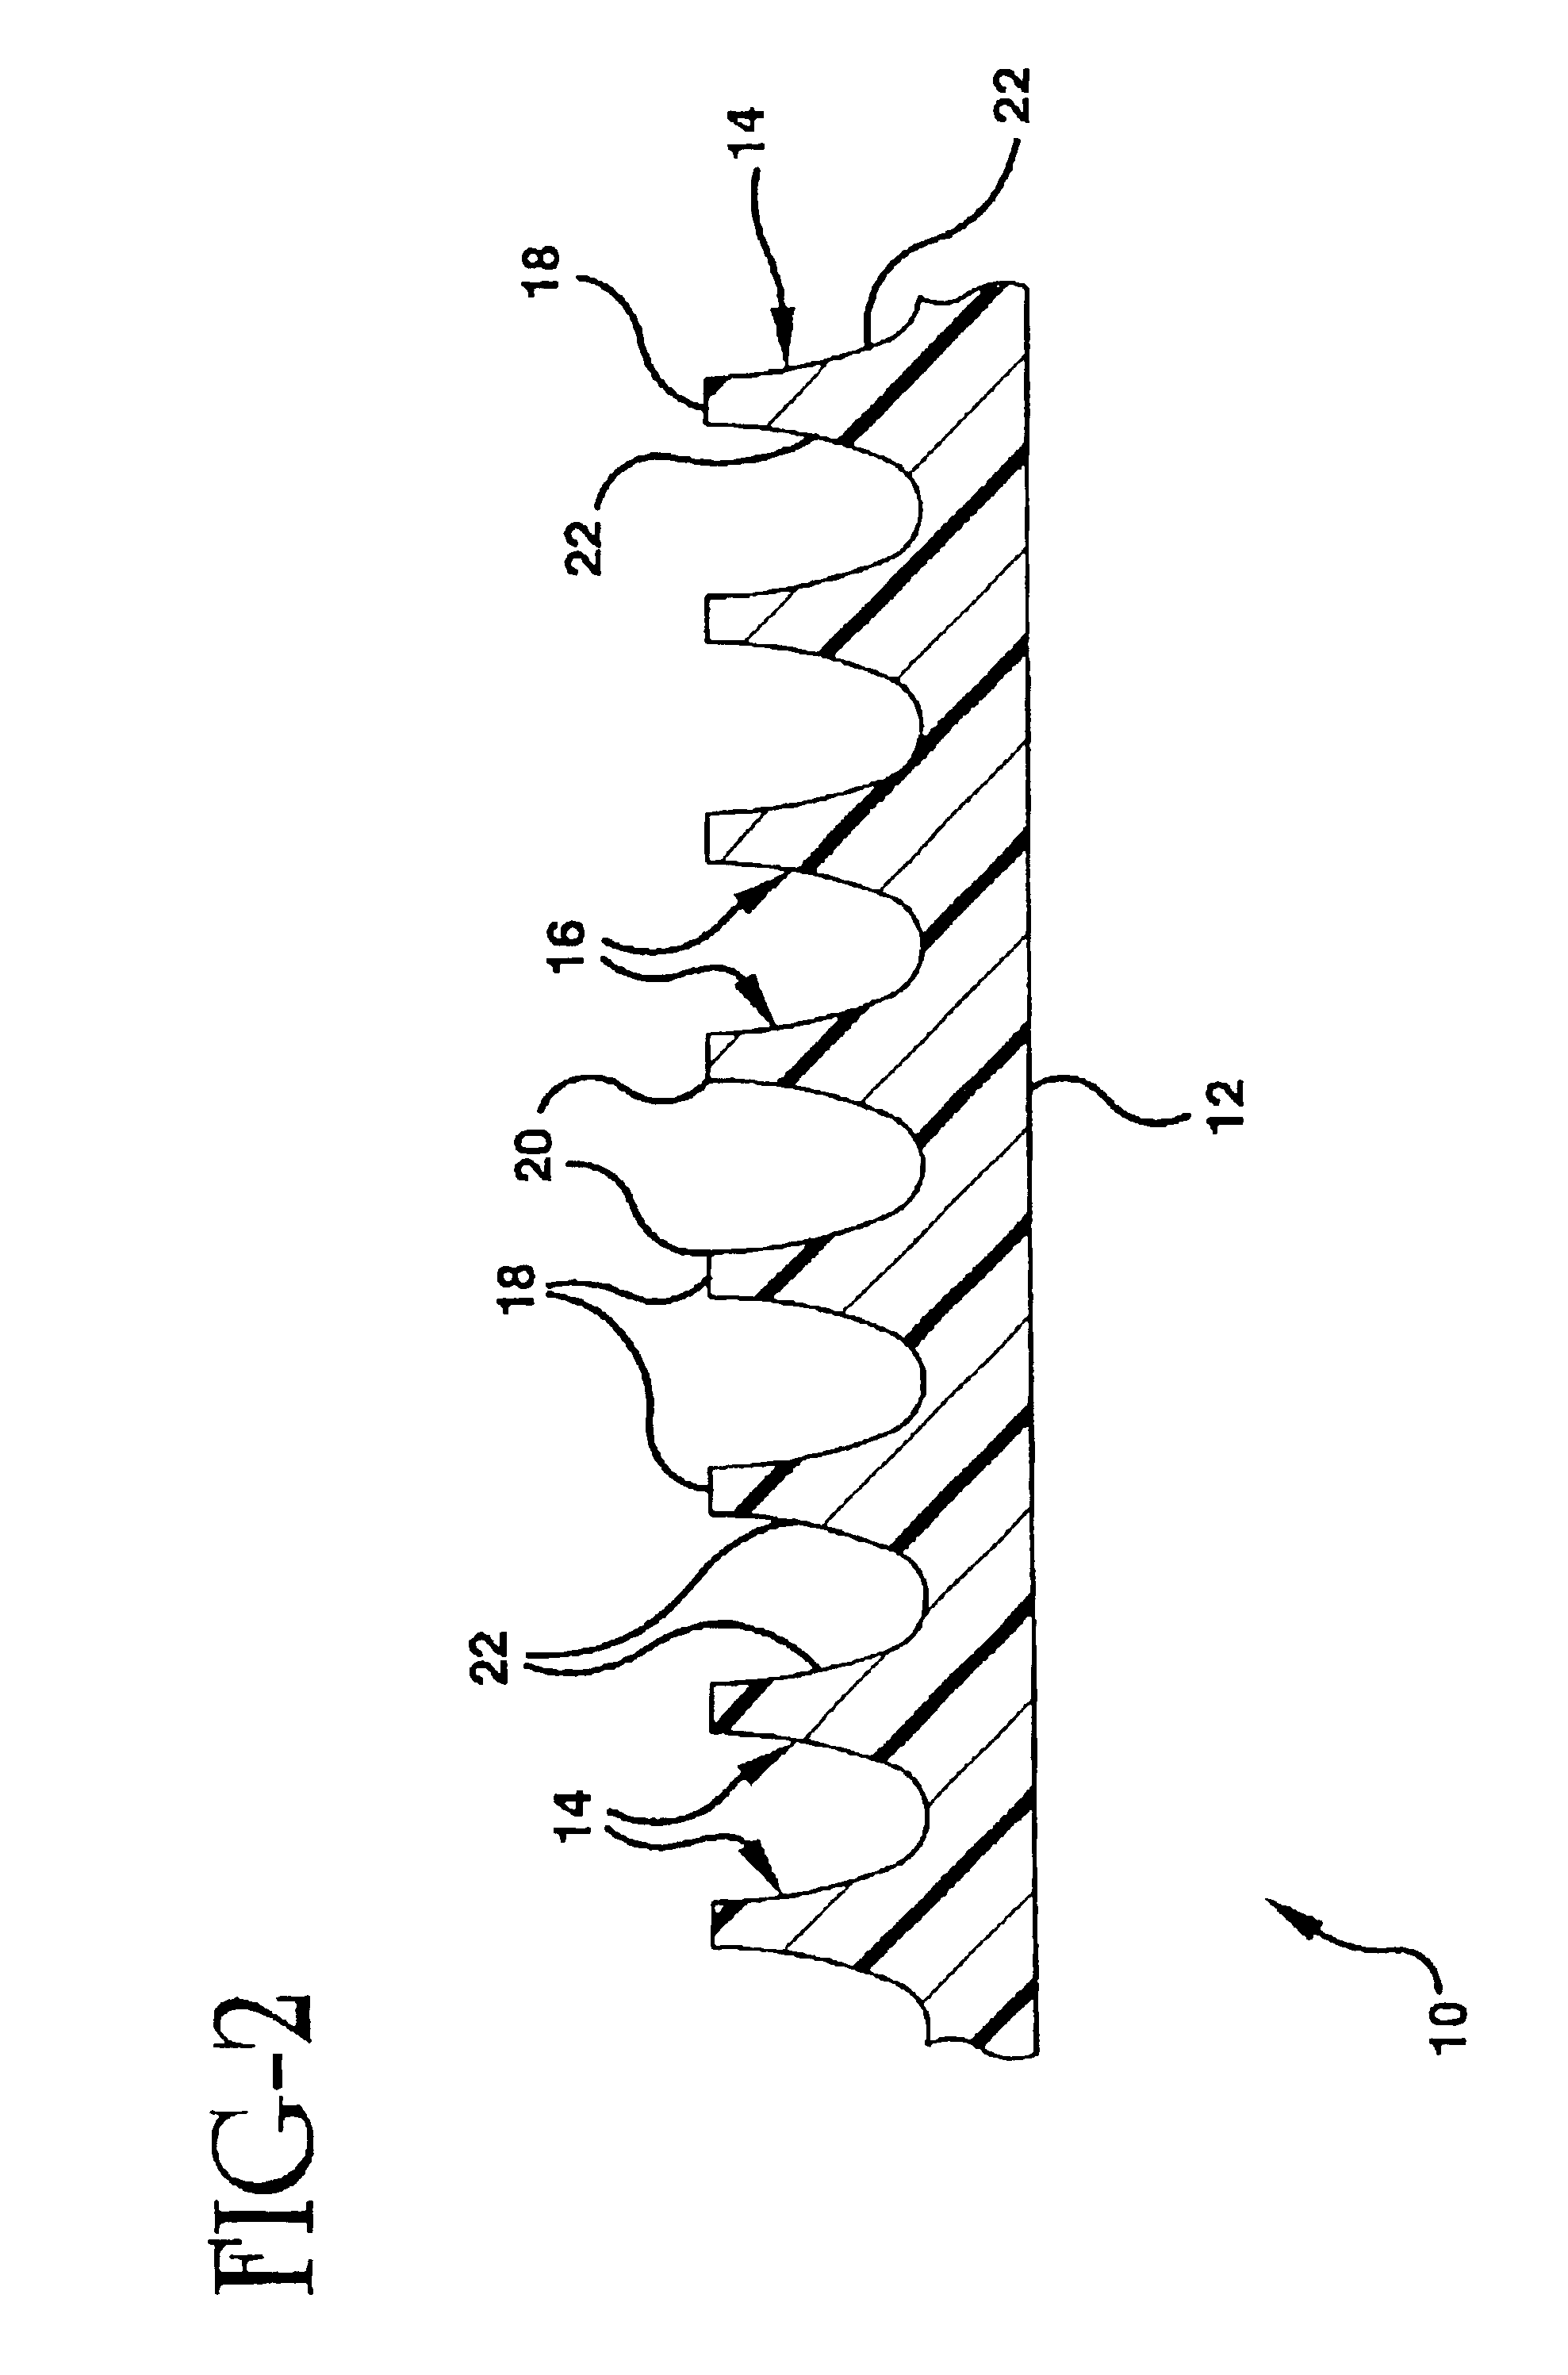 Method of forming a mold and molding a micro-device